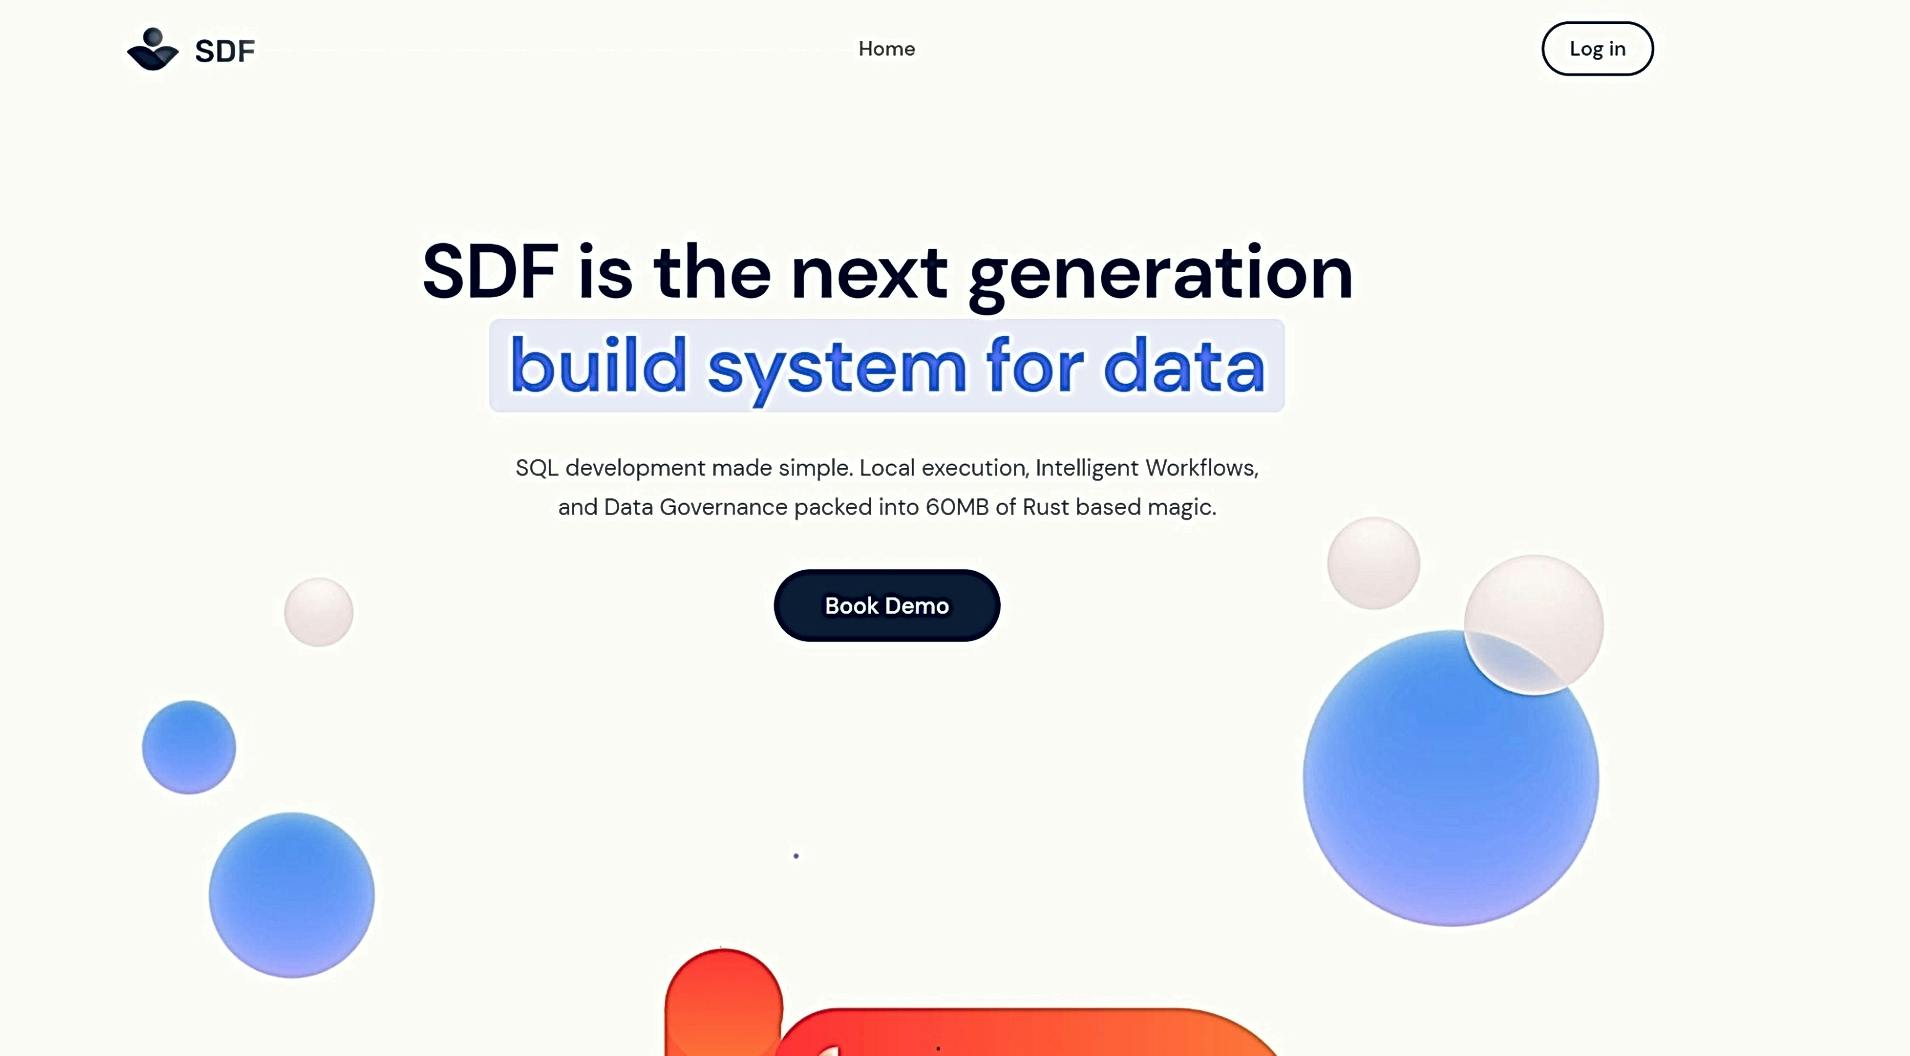 Sdf featured